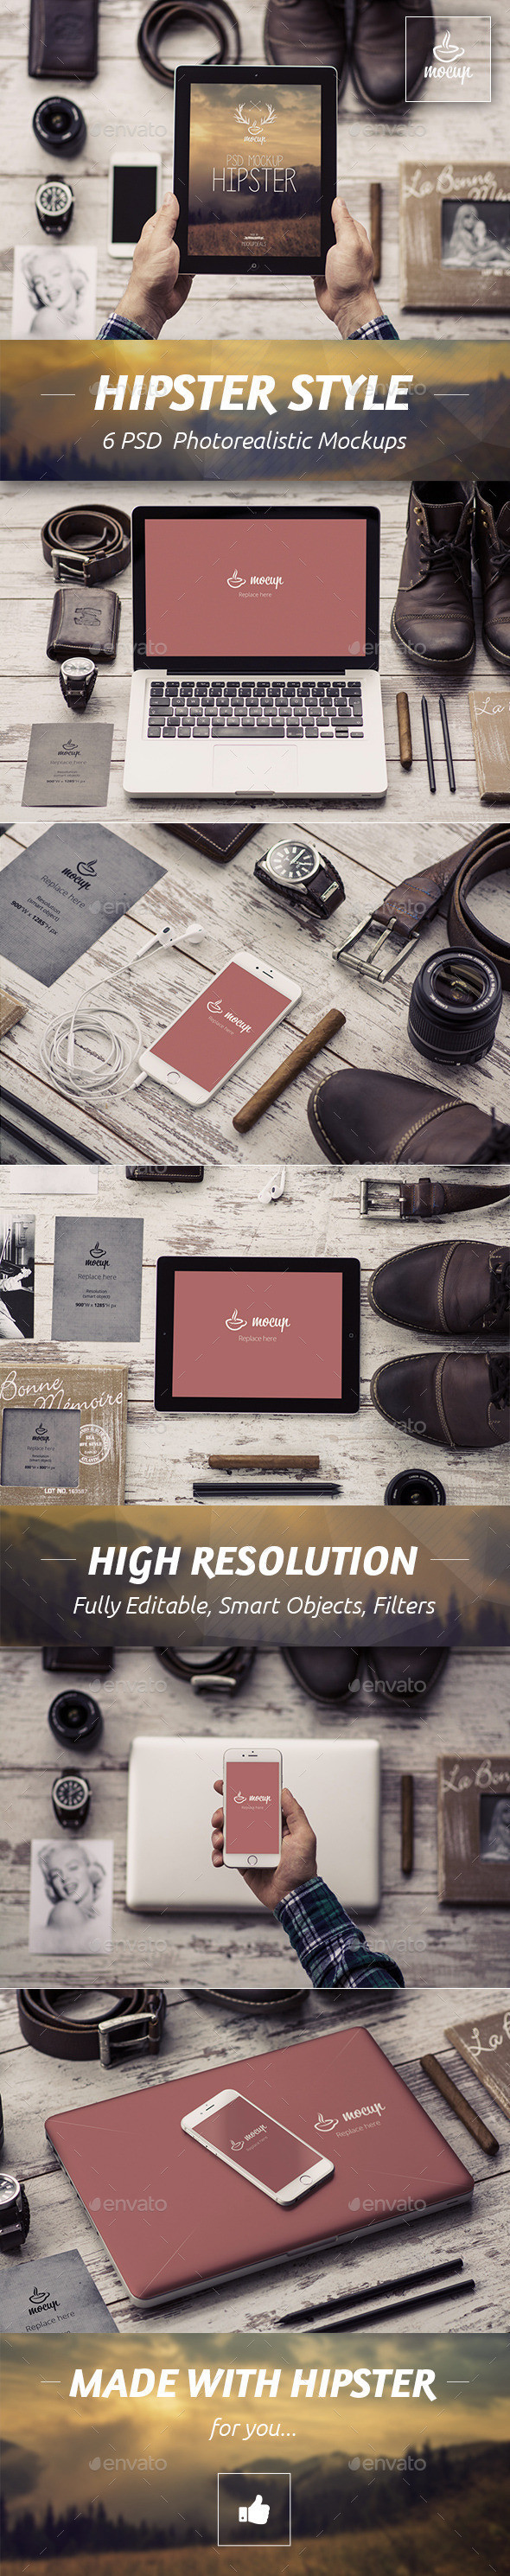 Envato template hipster psd mockups